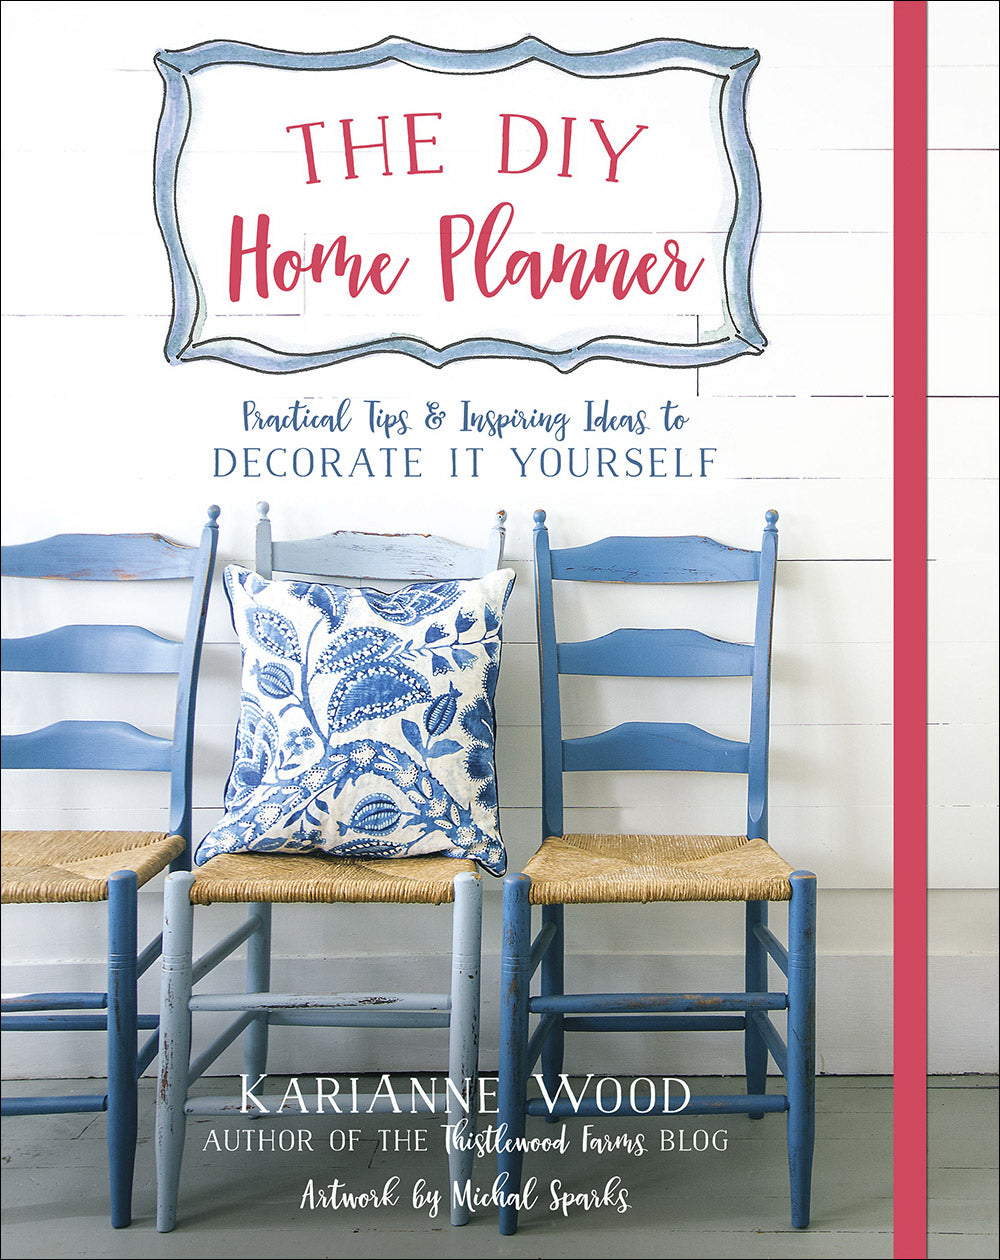 Image of The DIY Home Planner other